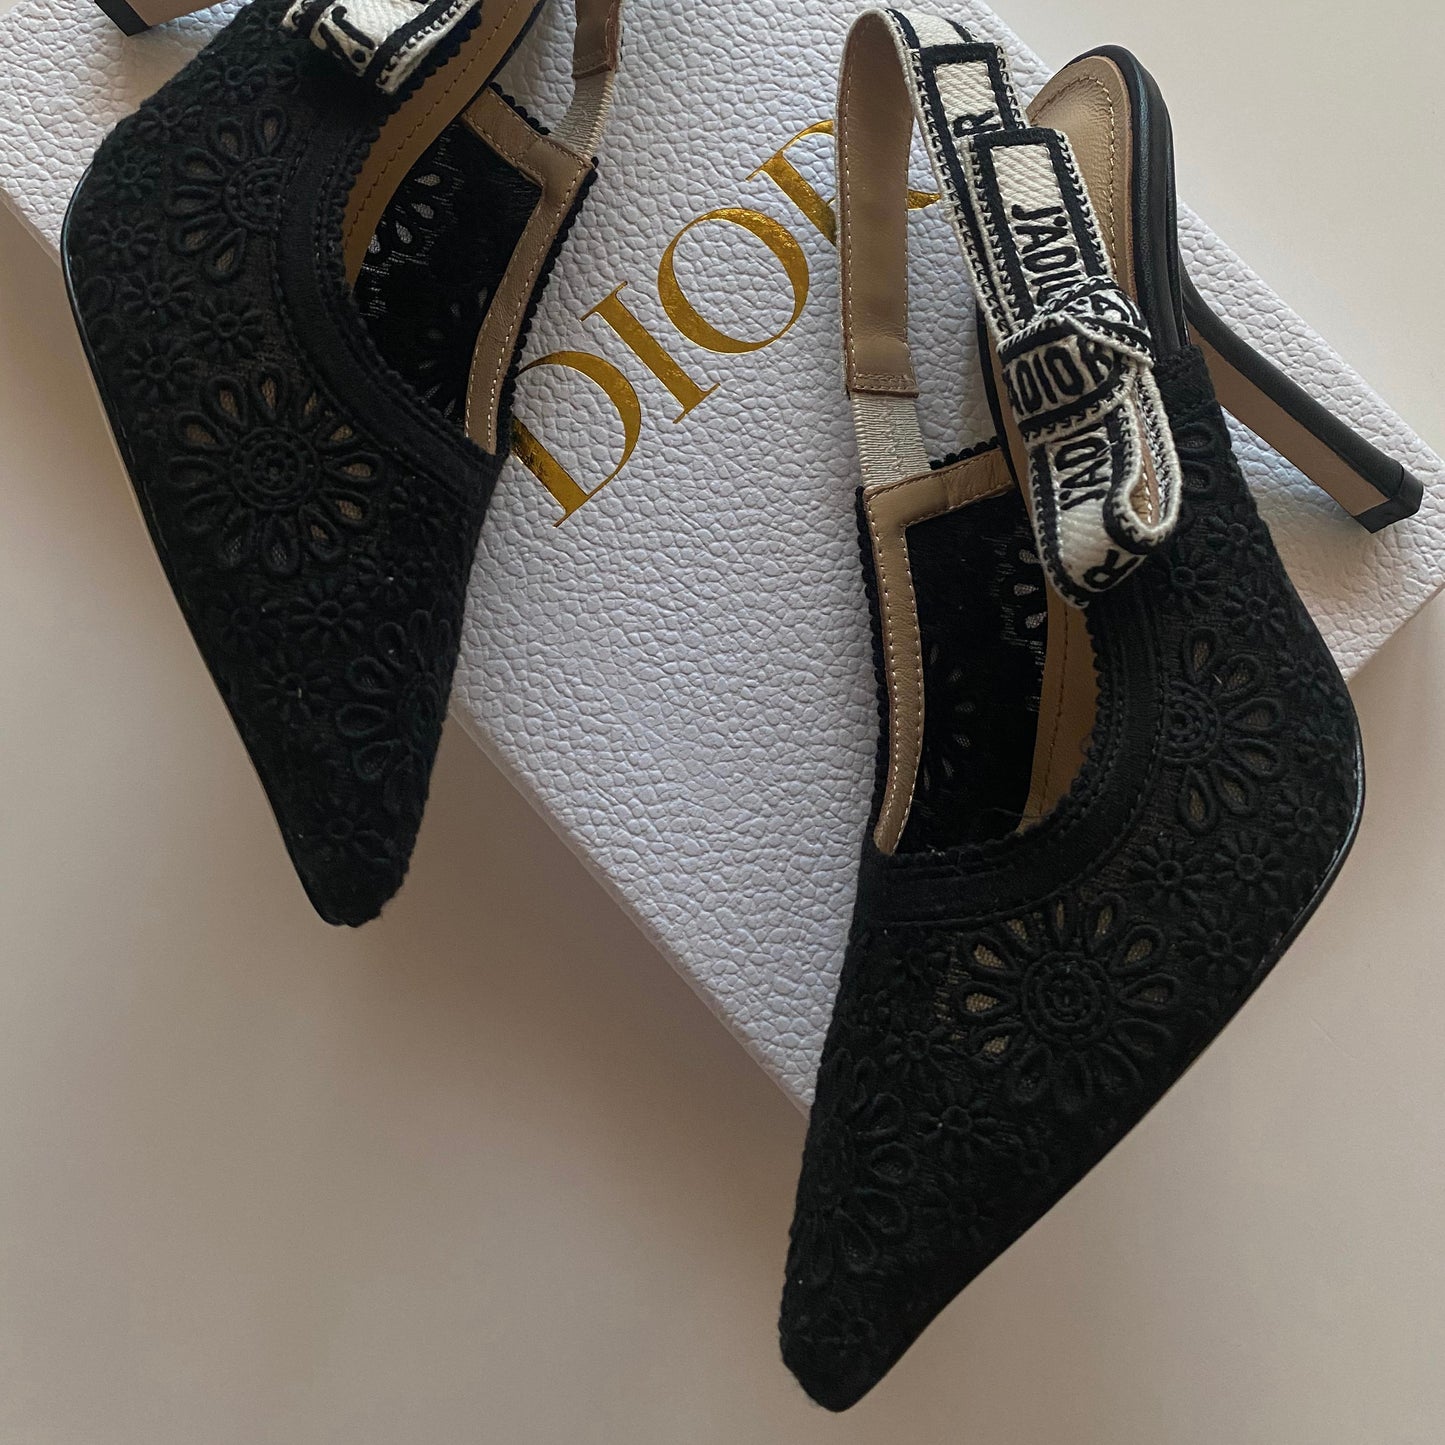 Dior Style #19 Shoes